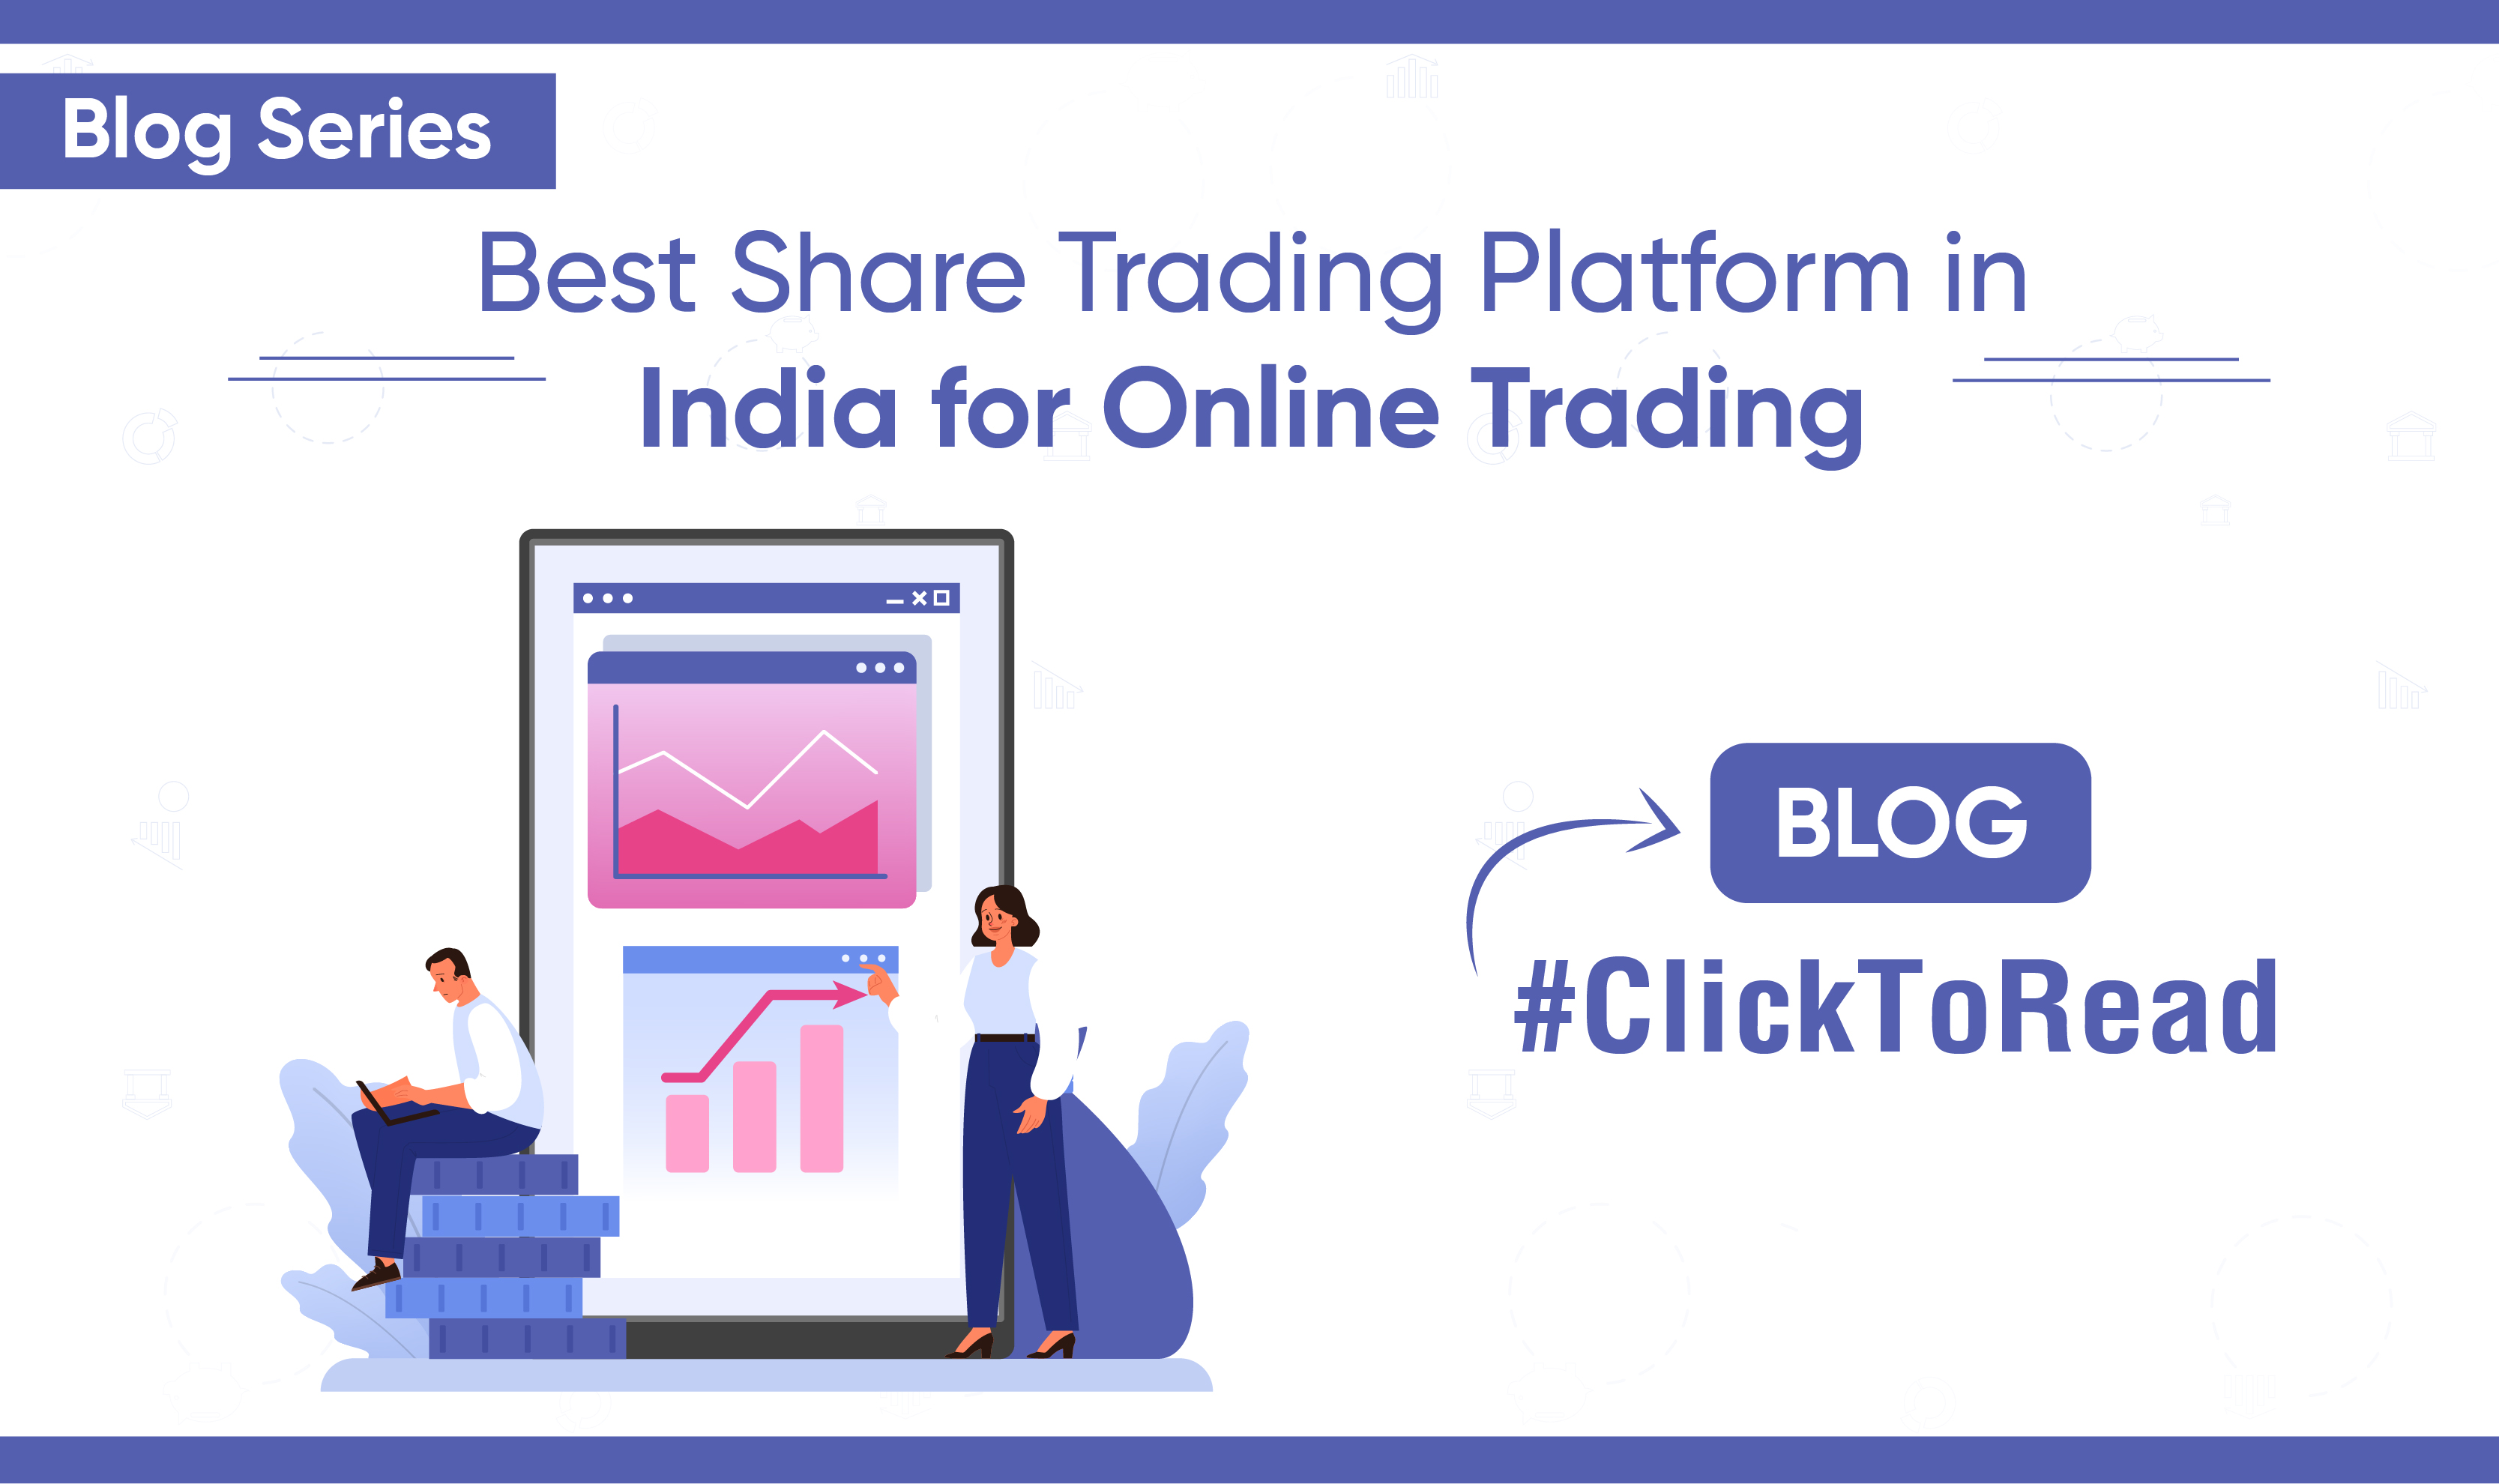 Best Share Trading Platform in India for Online Trading